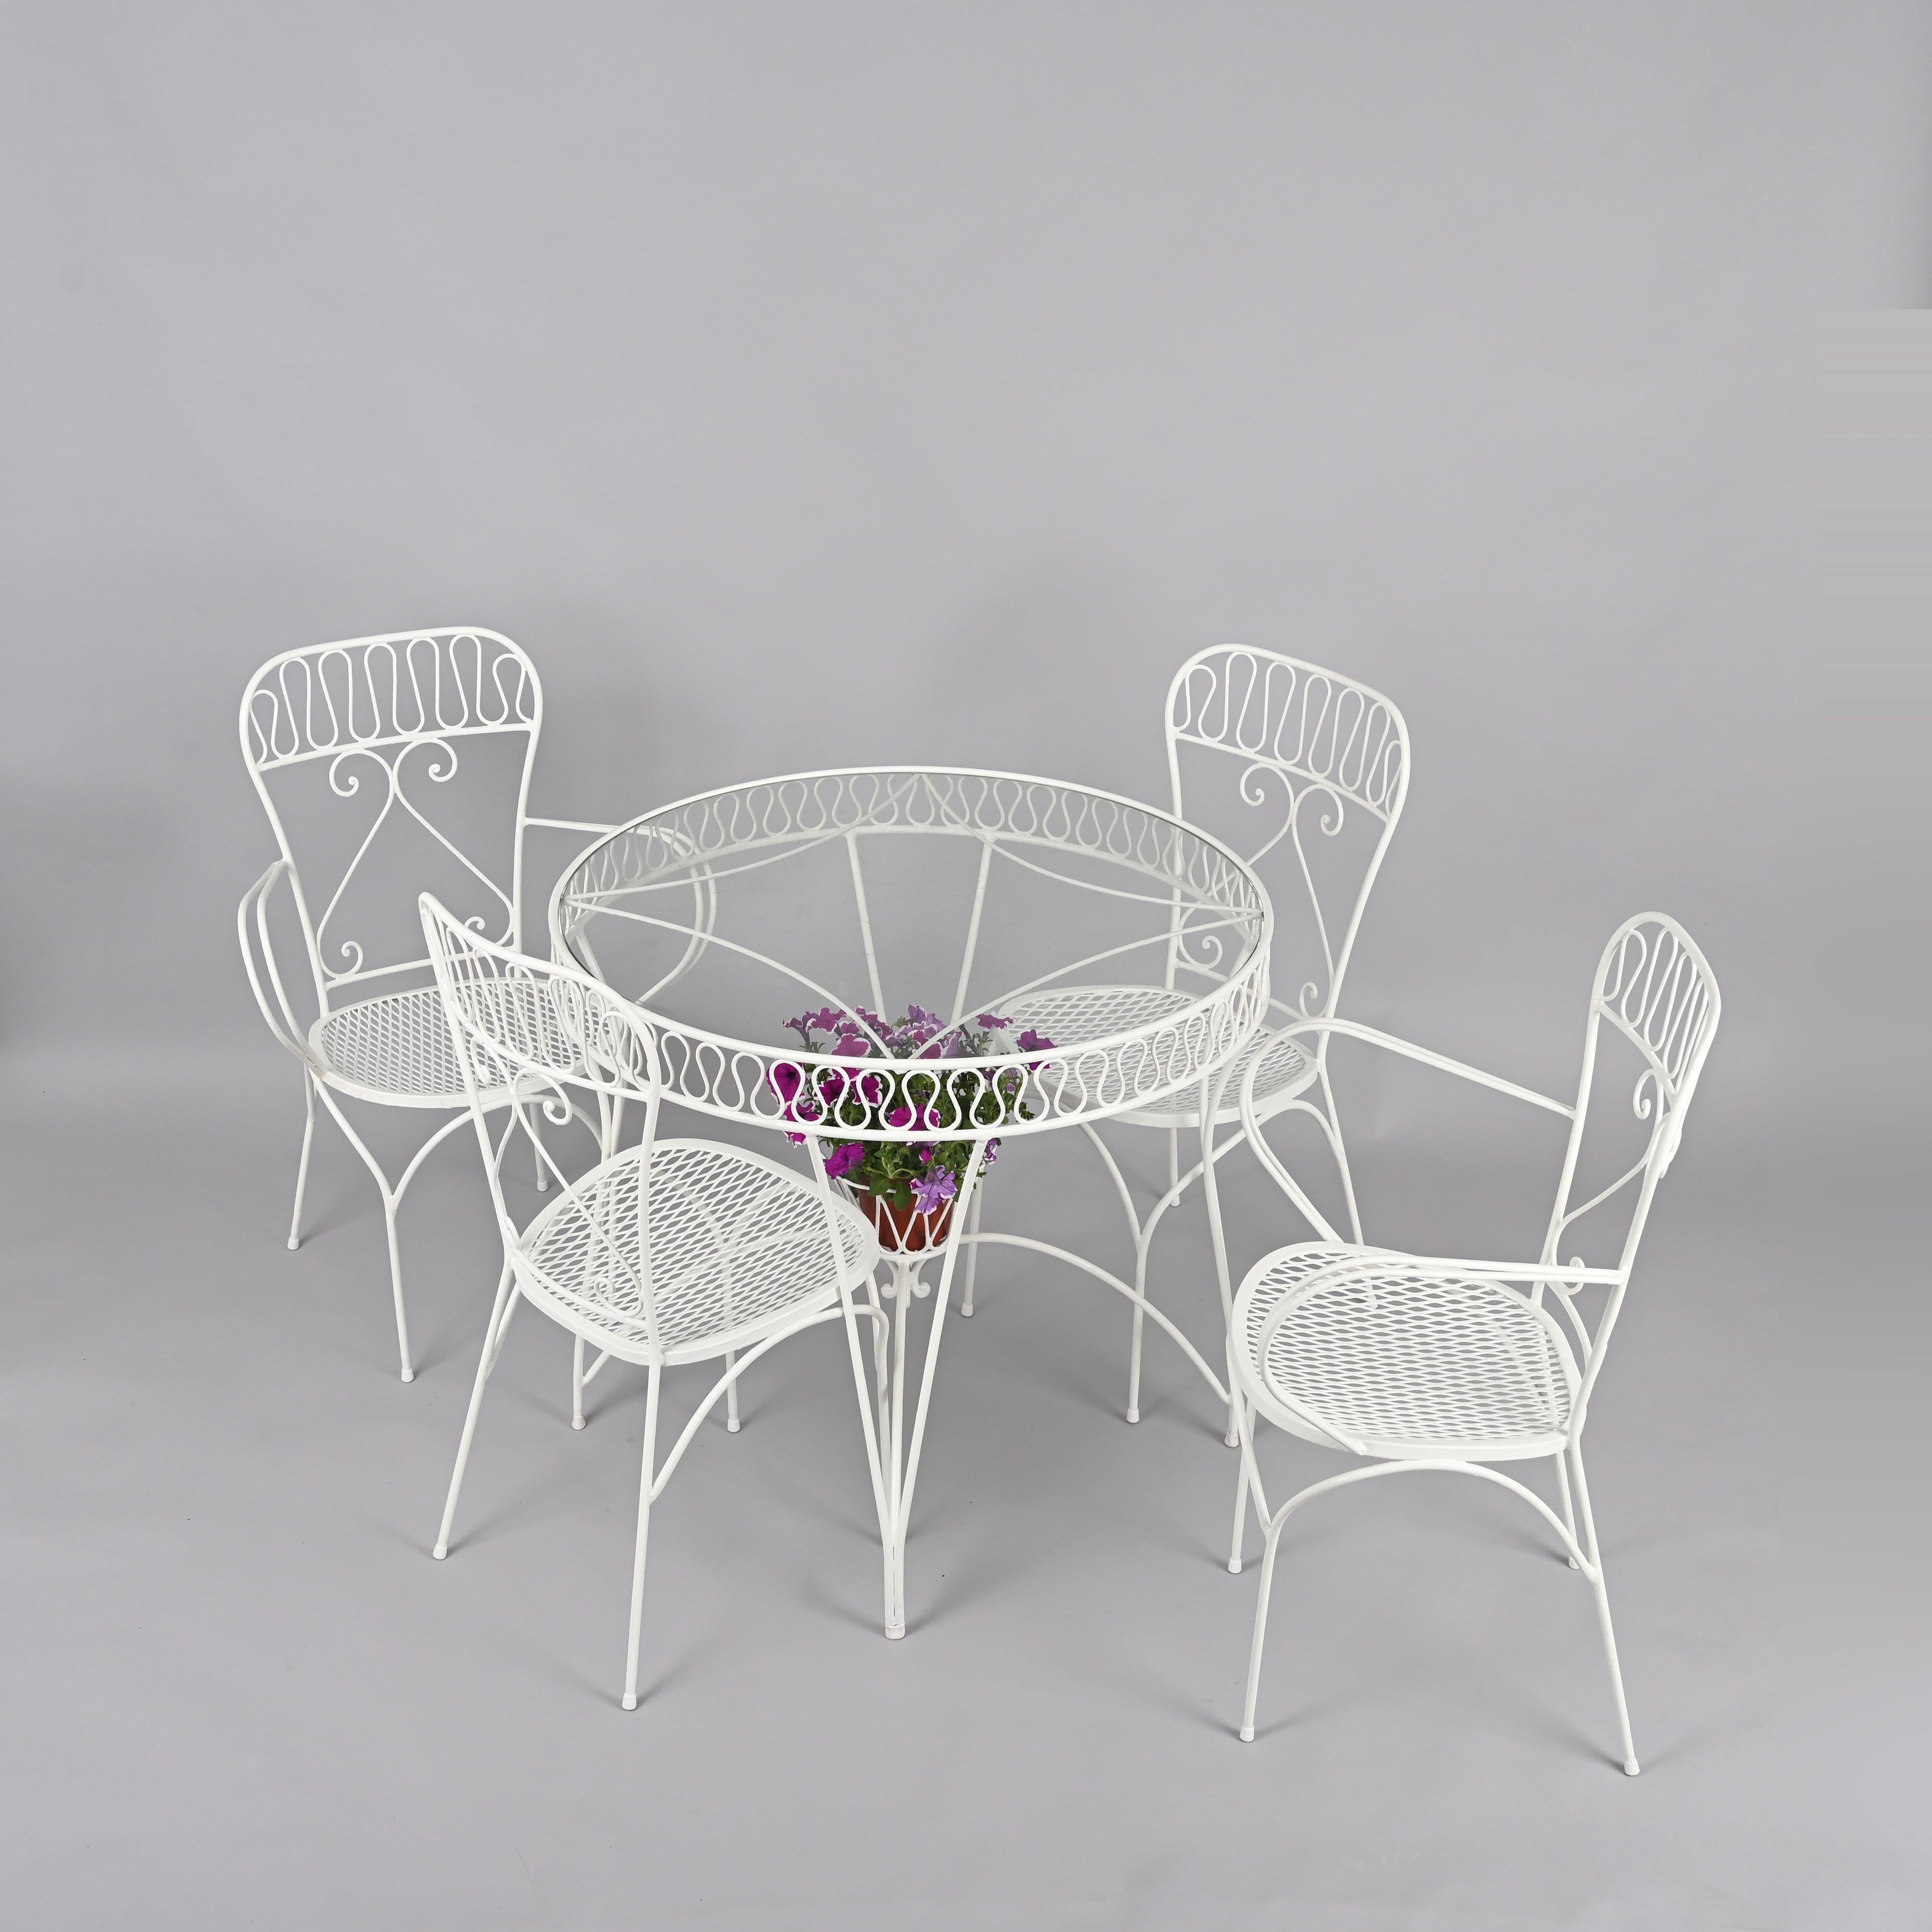 Enameled Mid-Century Italian Wrought Iron Set, 4 Chairs & Table w/ Plant Holder, 1950s For Sale